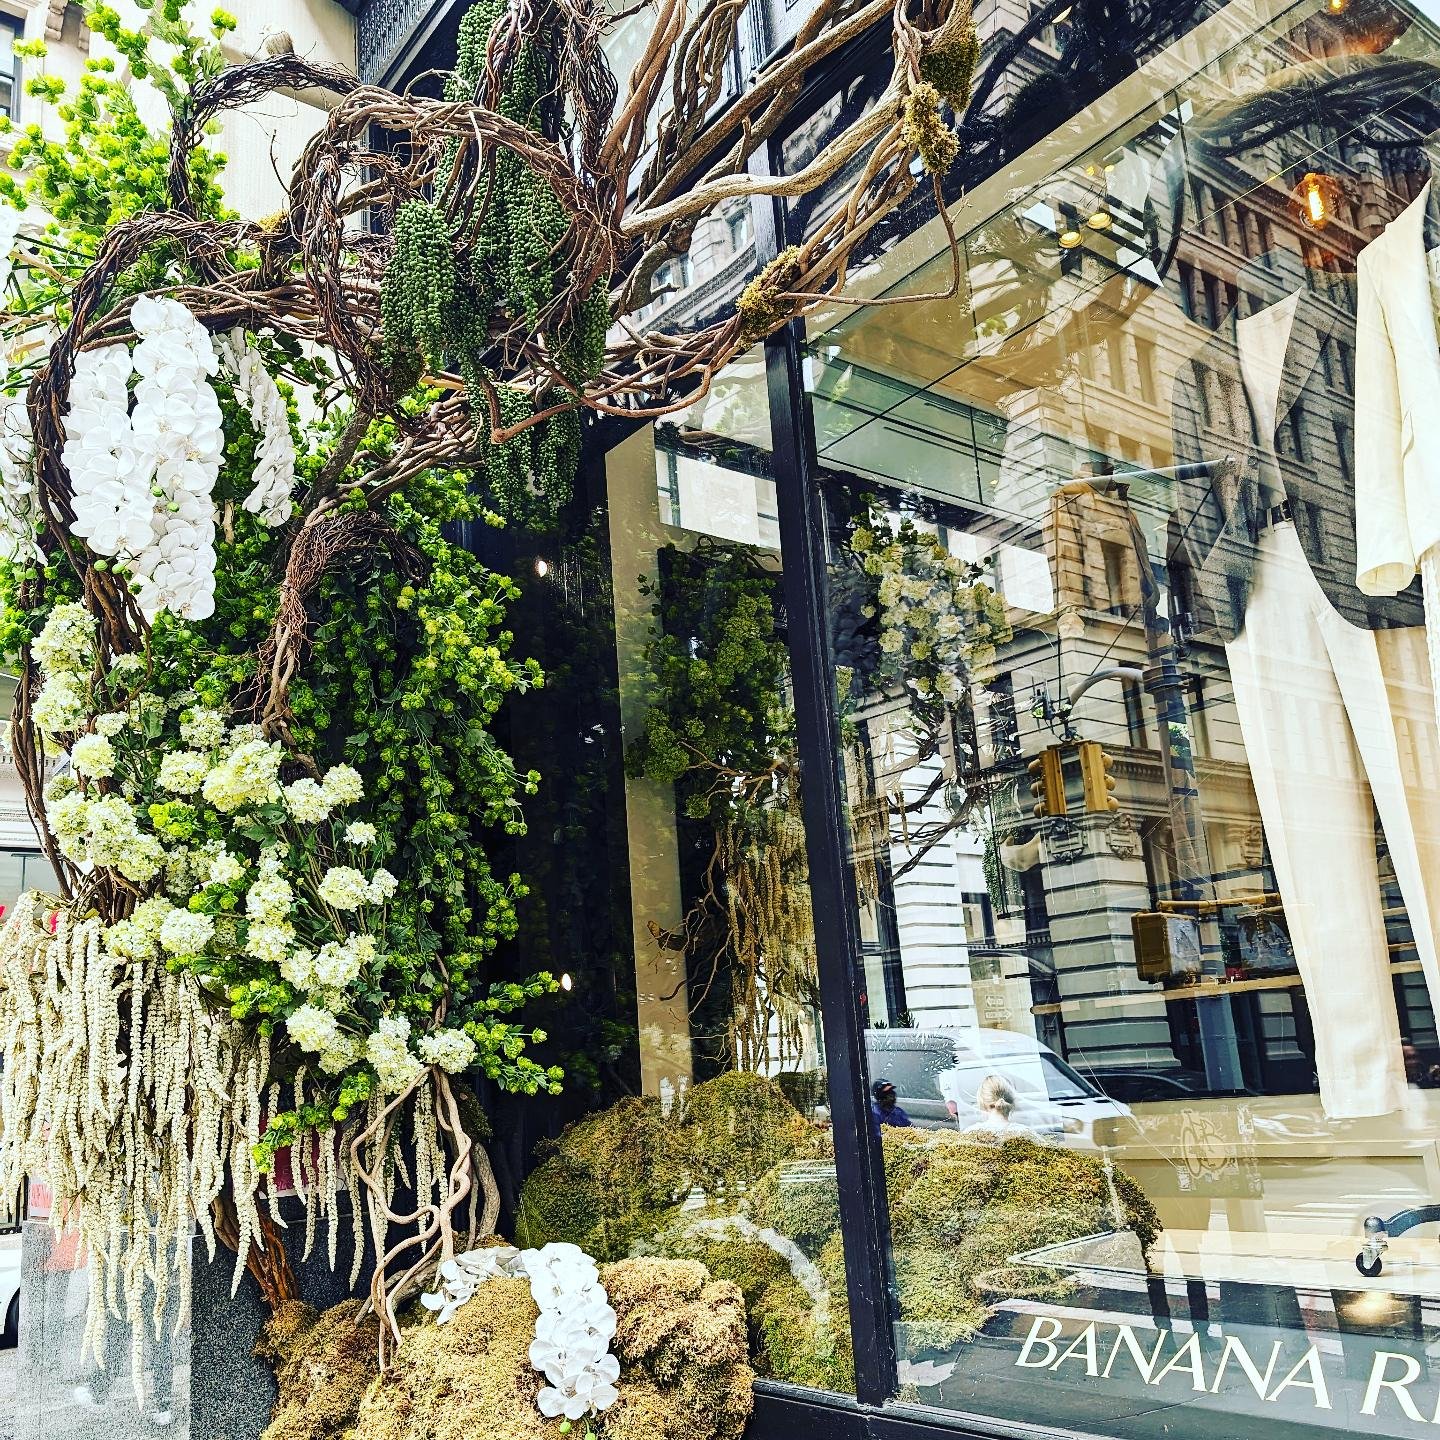 As someone who spent a number of years as a visual merchandiser, I always love seeing inspired windows while out on an inspiration walk! @bananarepublic's #florals and #greenery on the outside of the windows is such a fun visual! #styledirector #crea